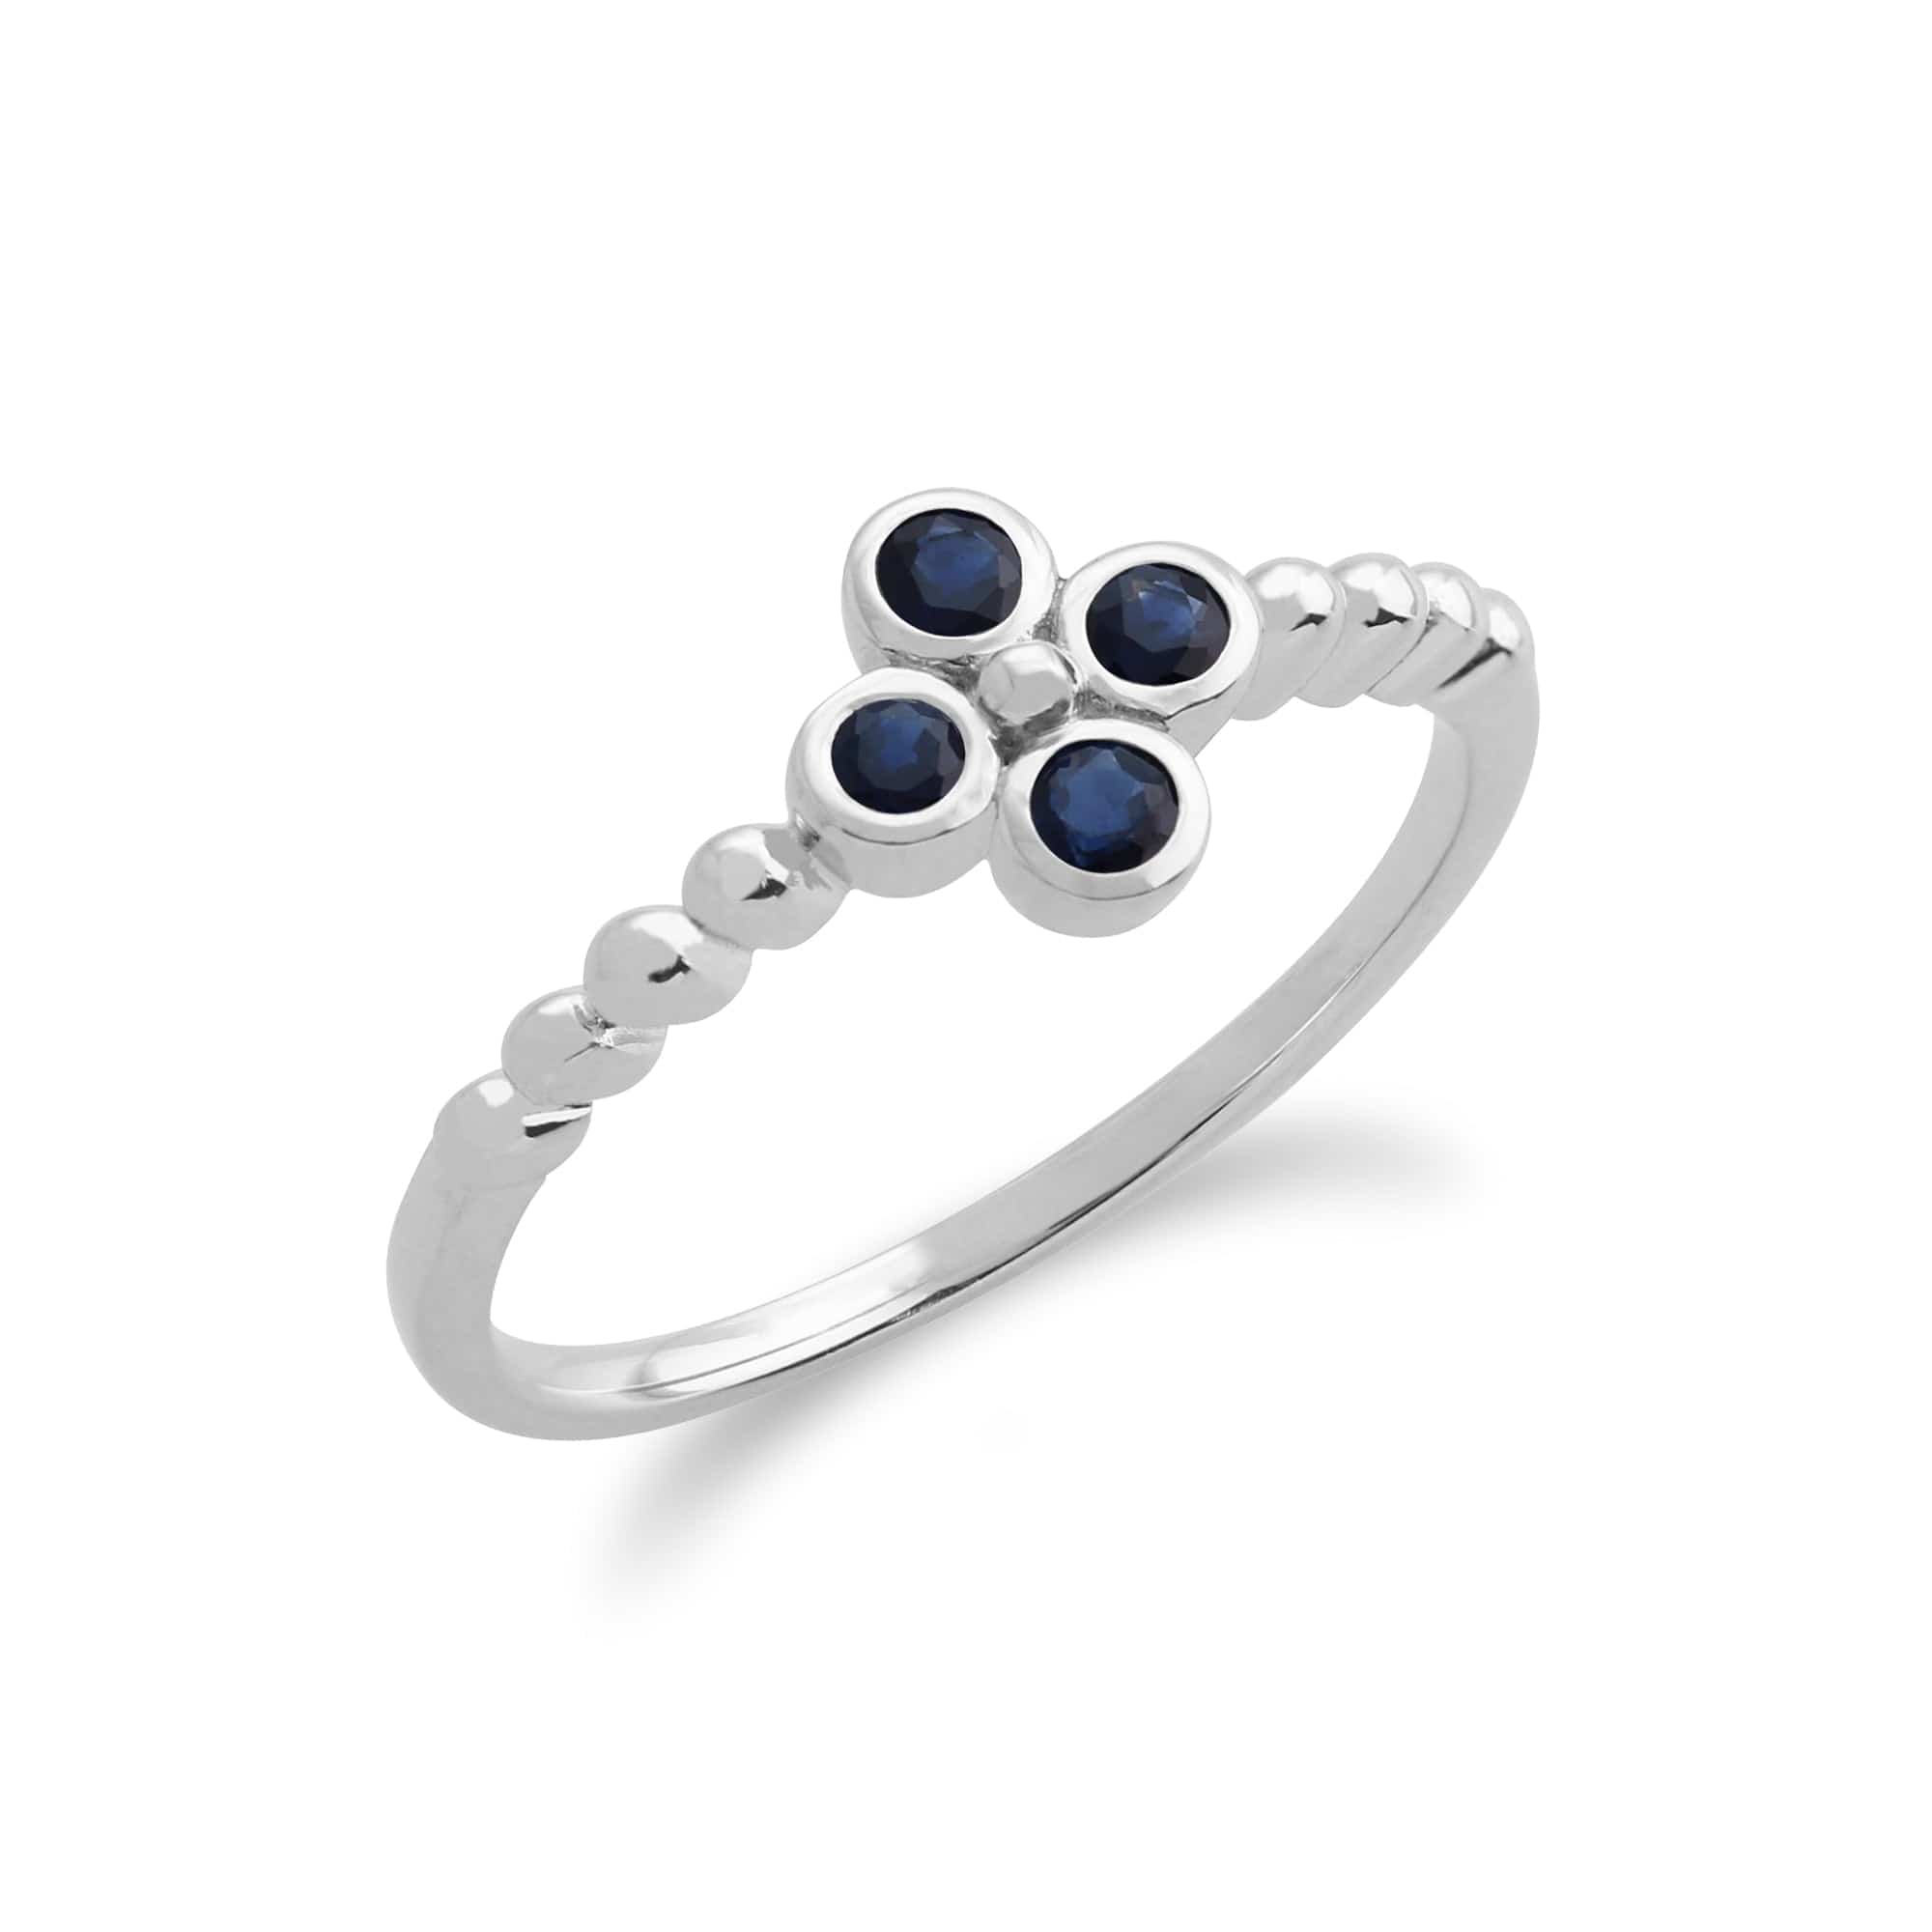 Floral Round Sapphire Clover Stud Earrings & Ring Set in 925 Sterling Silver - Gemondo